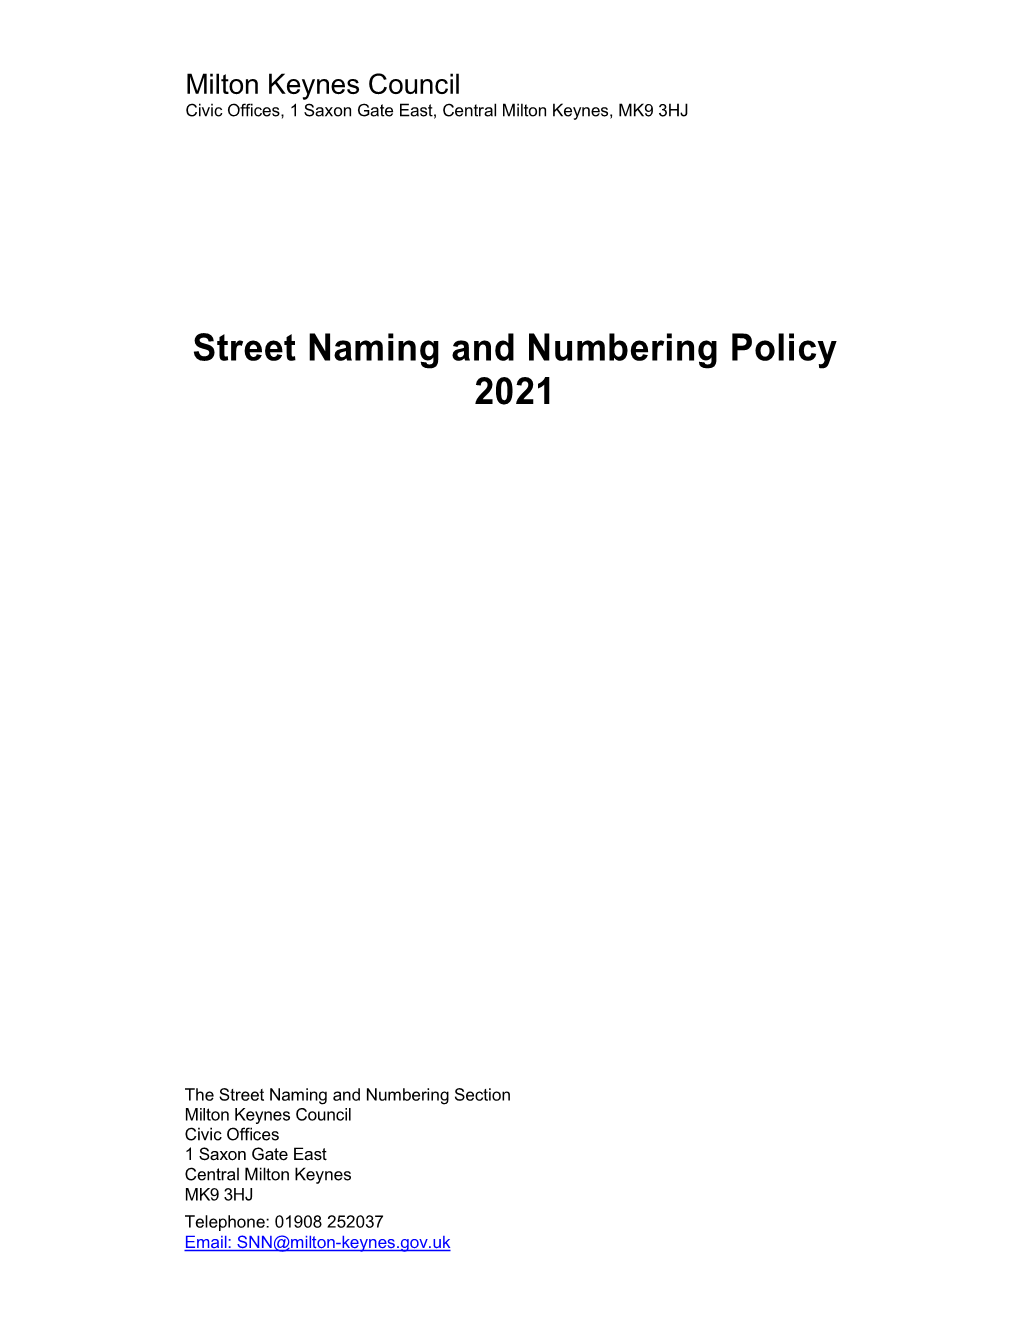 Street Naming and Numbering Policy 2021